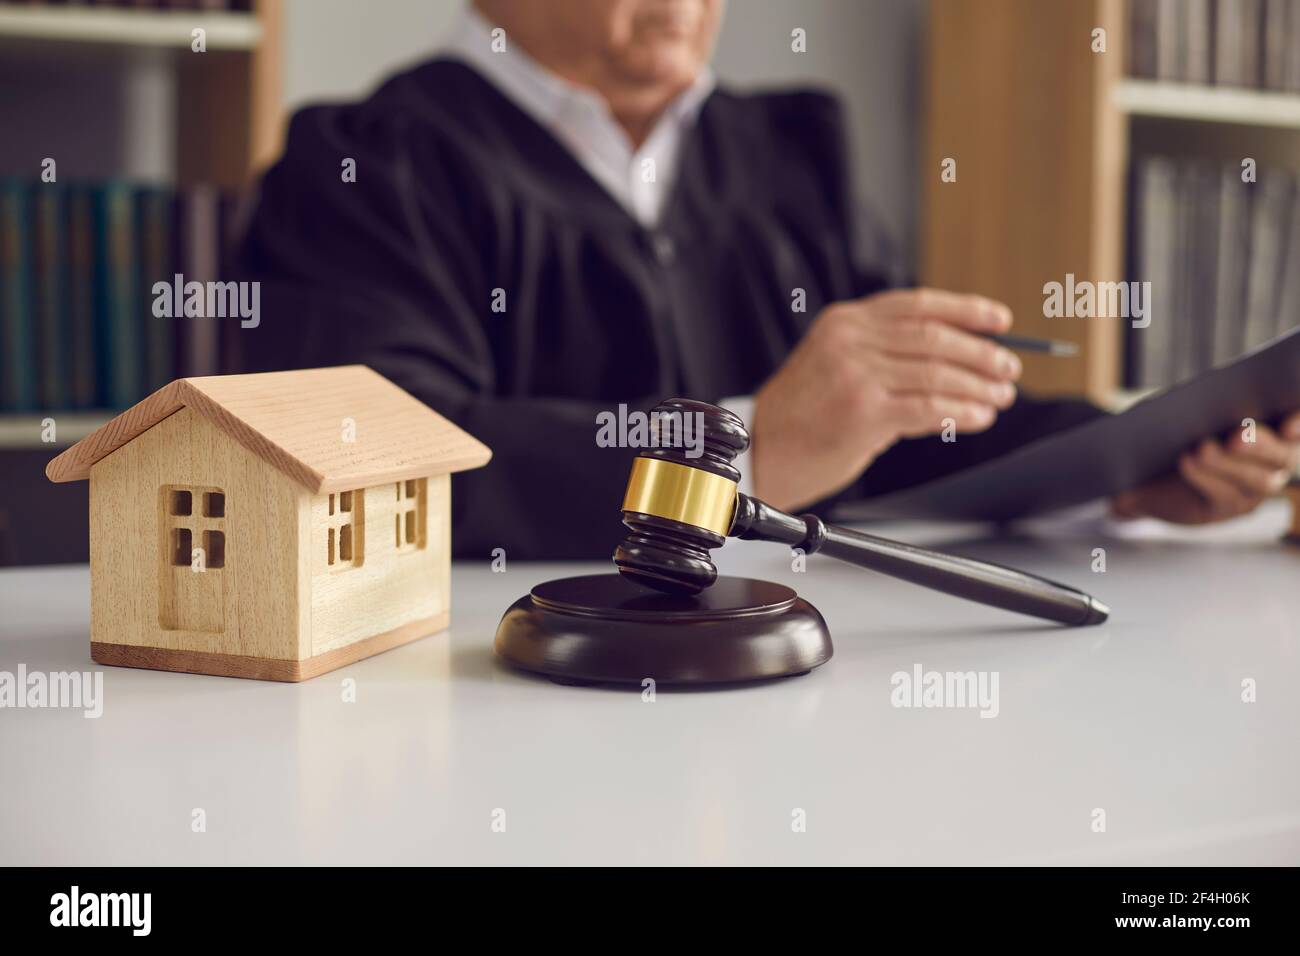 Closeup of judge's gavel and little wooden toy house placed on table in court of law Stock Photo